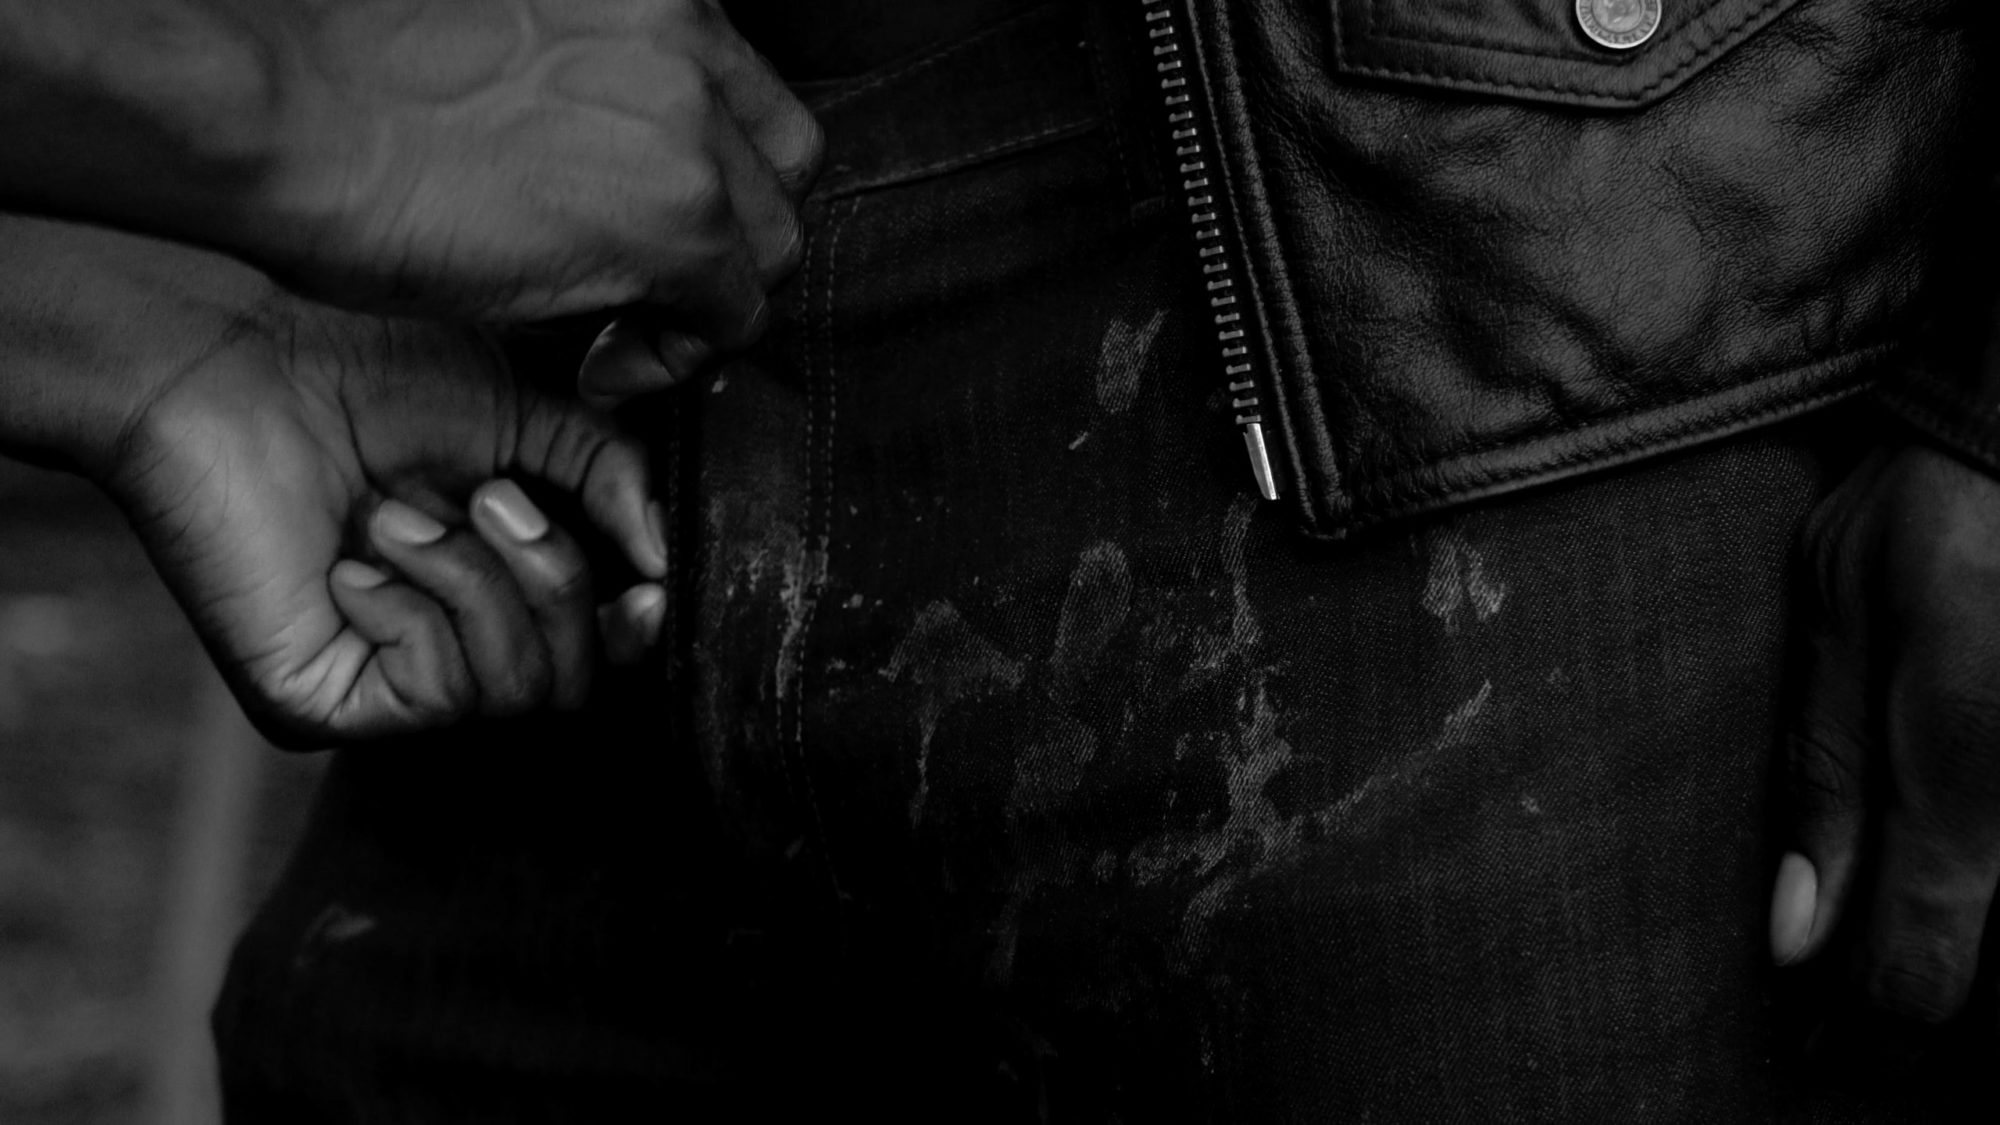 A black and white still of the short film Much Handled Things Are Always Soft. A close up of someone beginning to unzip a man's dirty jeans. He is also wearing a leather jacket.